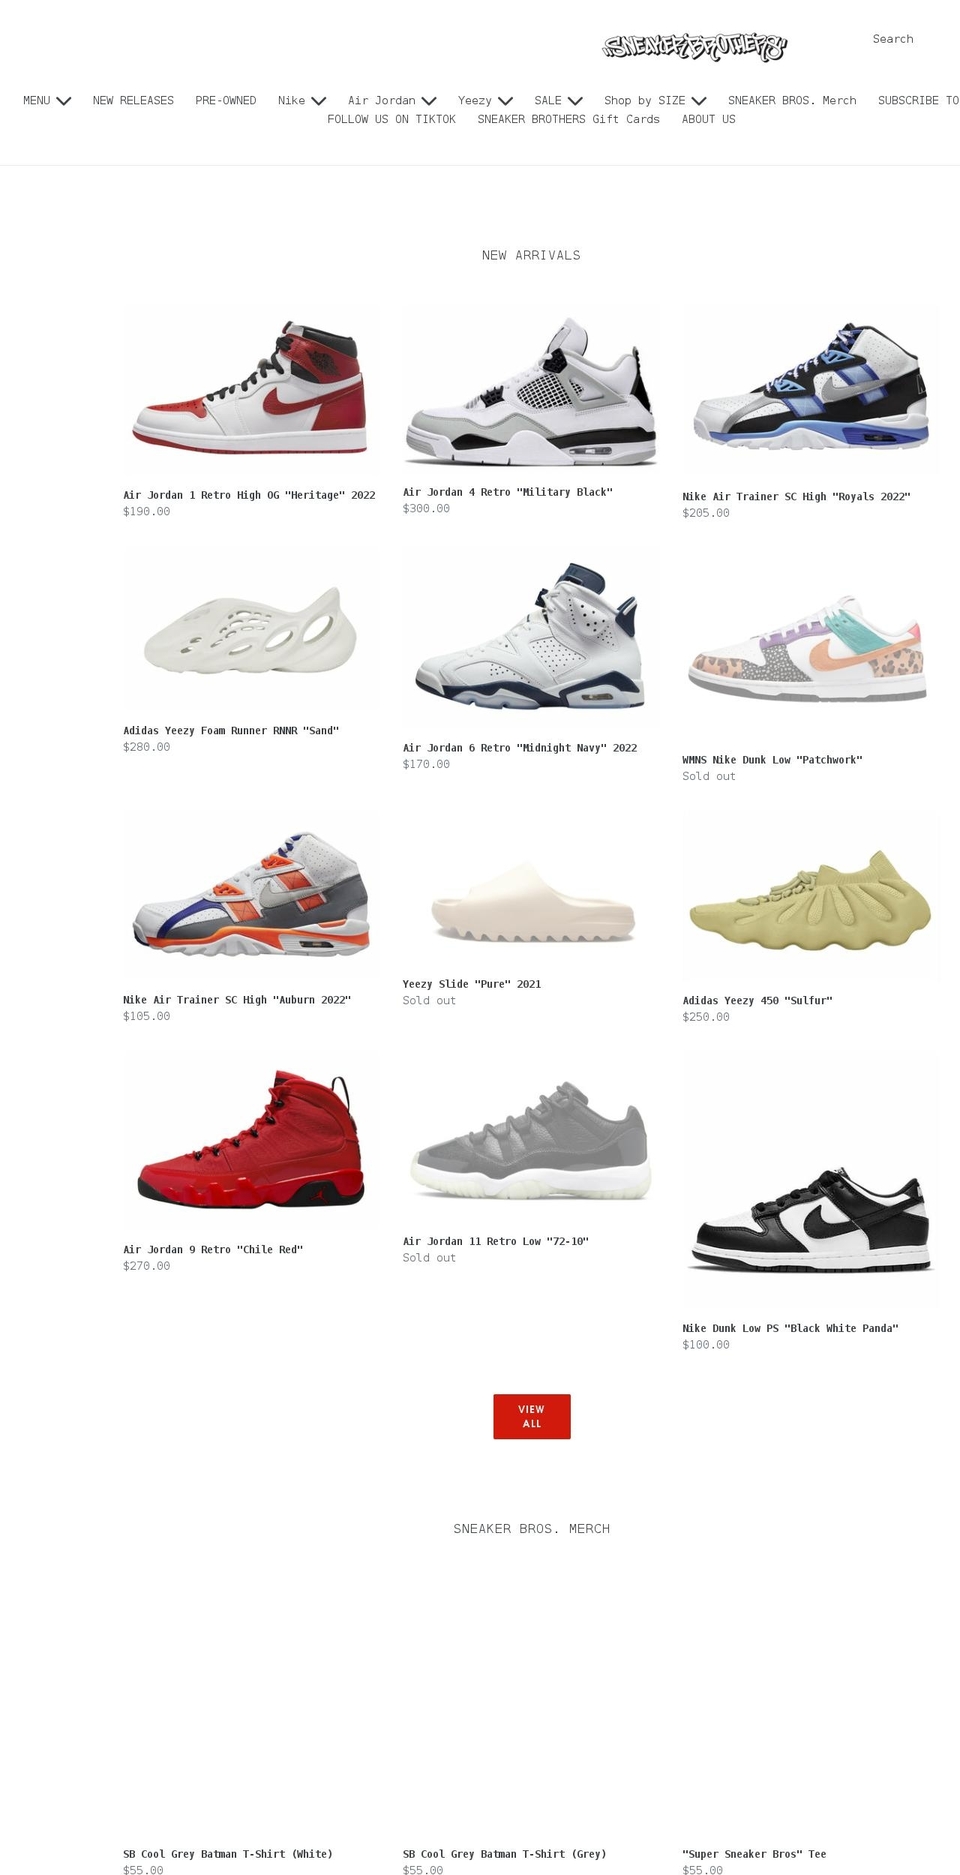 thesneakerbrothers.com shopify website screenshot